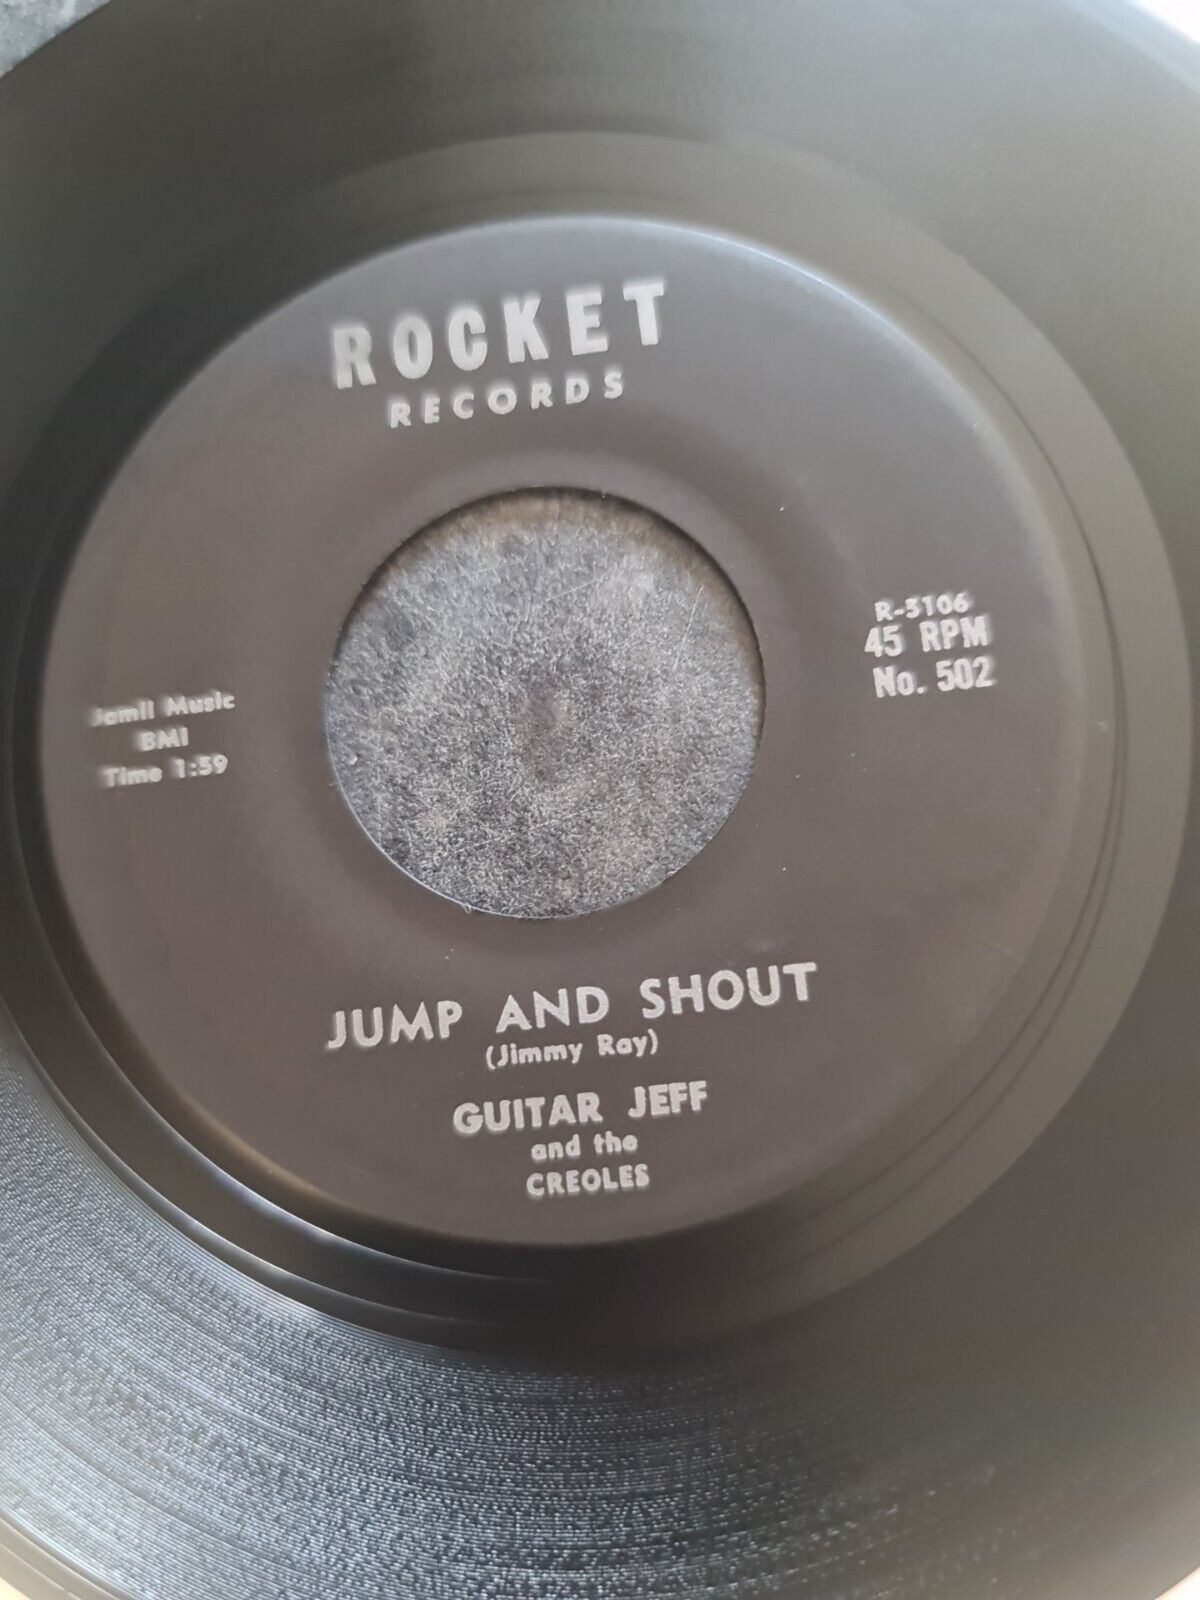 Guitar Jeff Jump And Shout  Rocket Records Usa 1958 No 502 etched  R-5106 